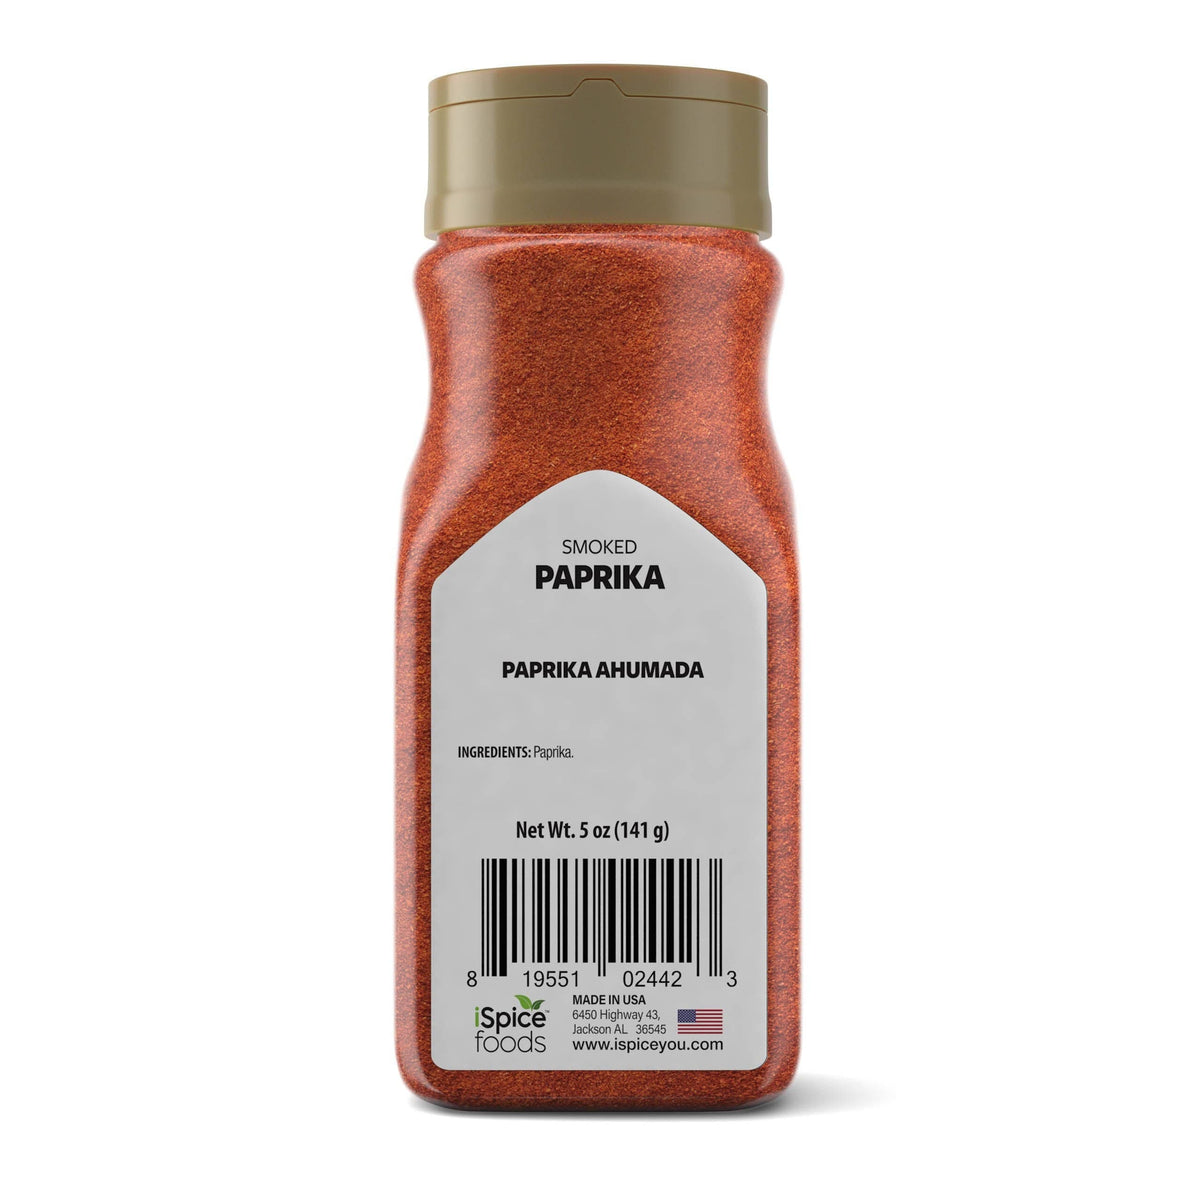 Smokey Flavors from the Best Smoked Paprika